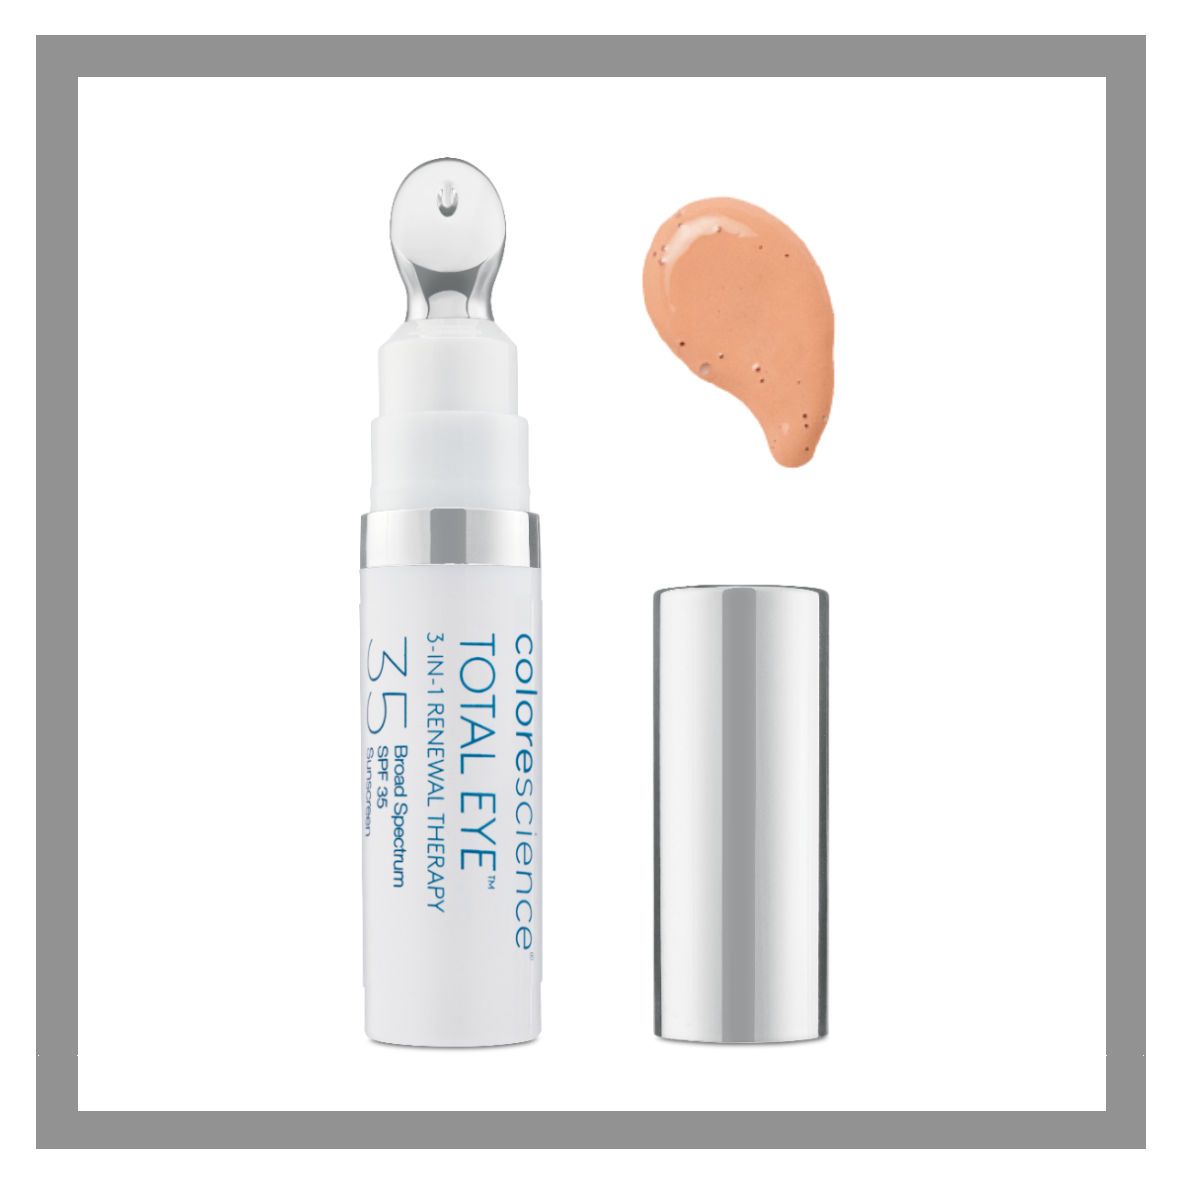 Colorescience 3 in 1 Total Eye Renewal Therapy SPF 35